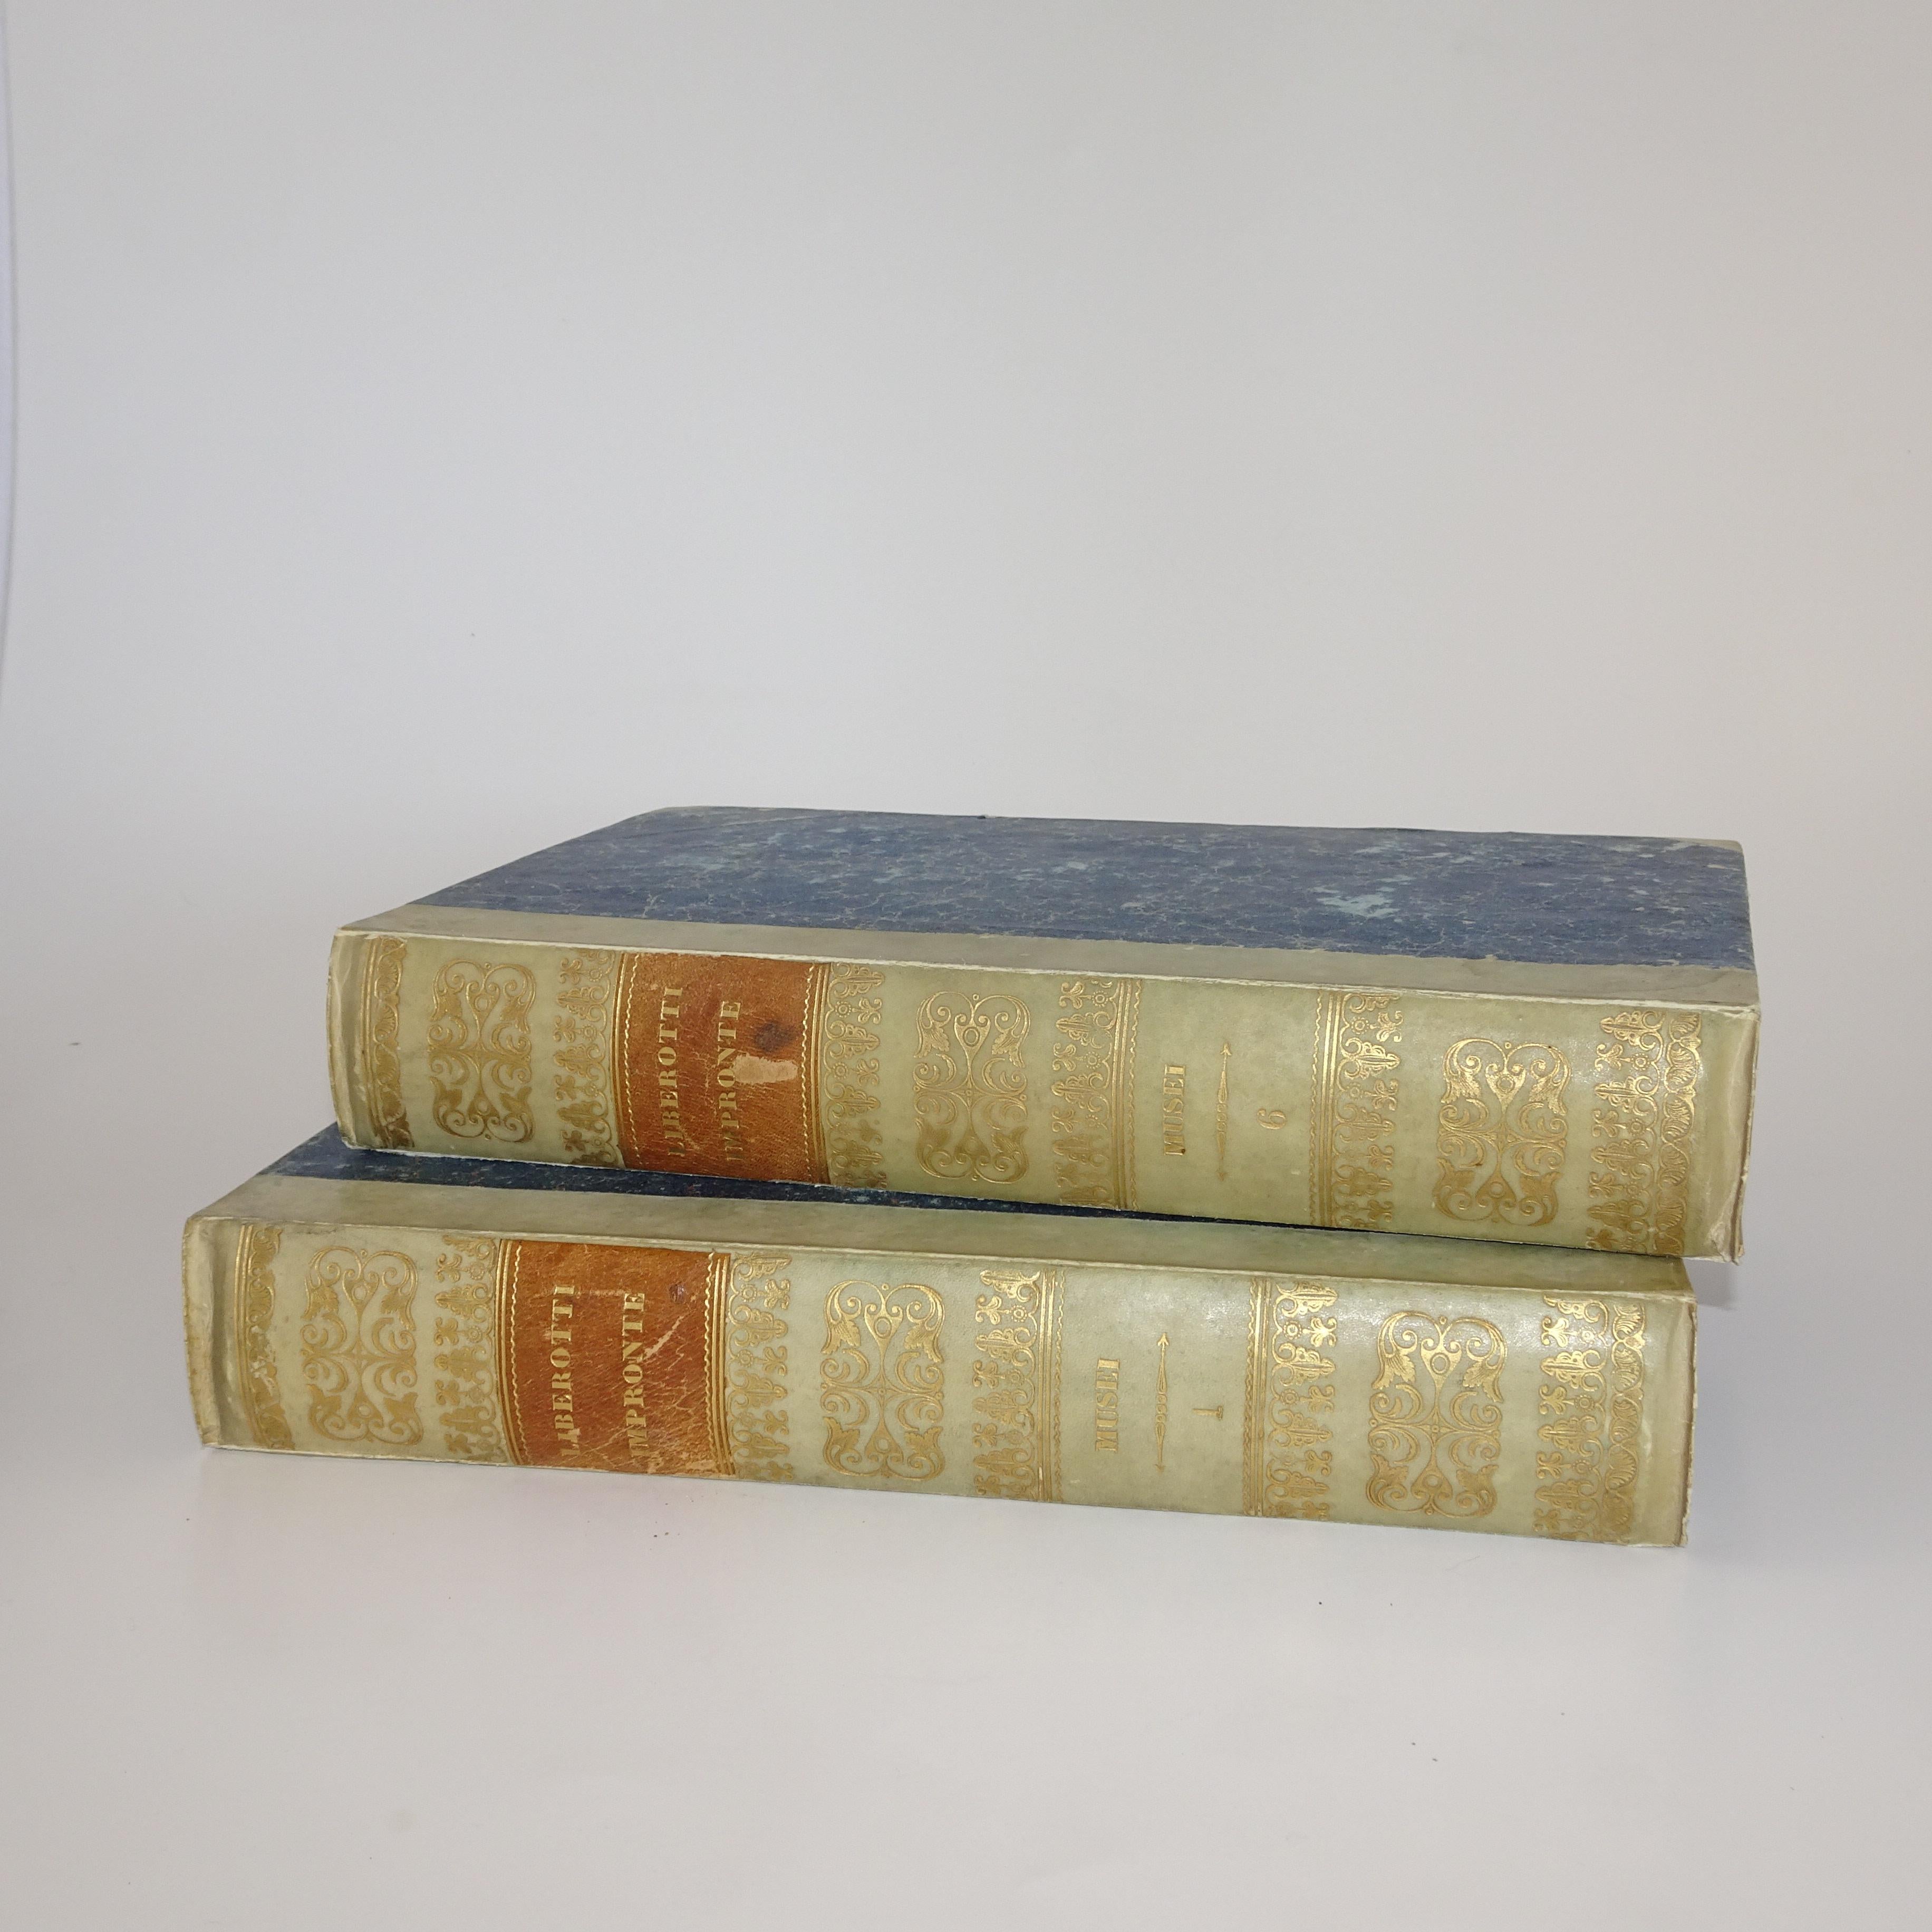 Original set of Grand Tour plaster intaglios. The set is in a double-sided box designed as a book with half marbled boards with gilt lettered vellum spine, speckled ‘page edge’. Inside the front and back cover is a hand written key describing the